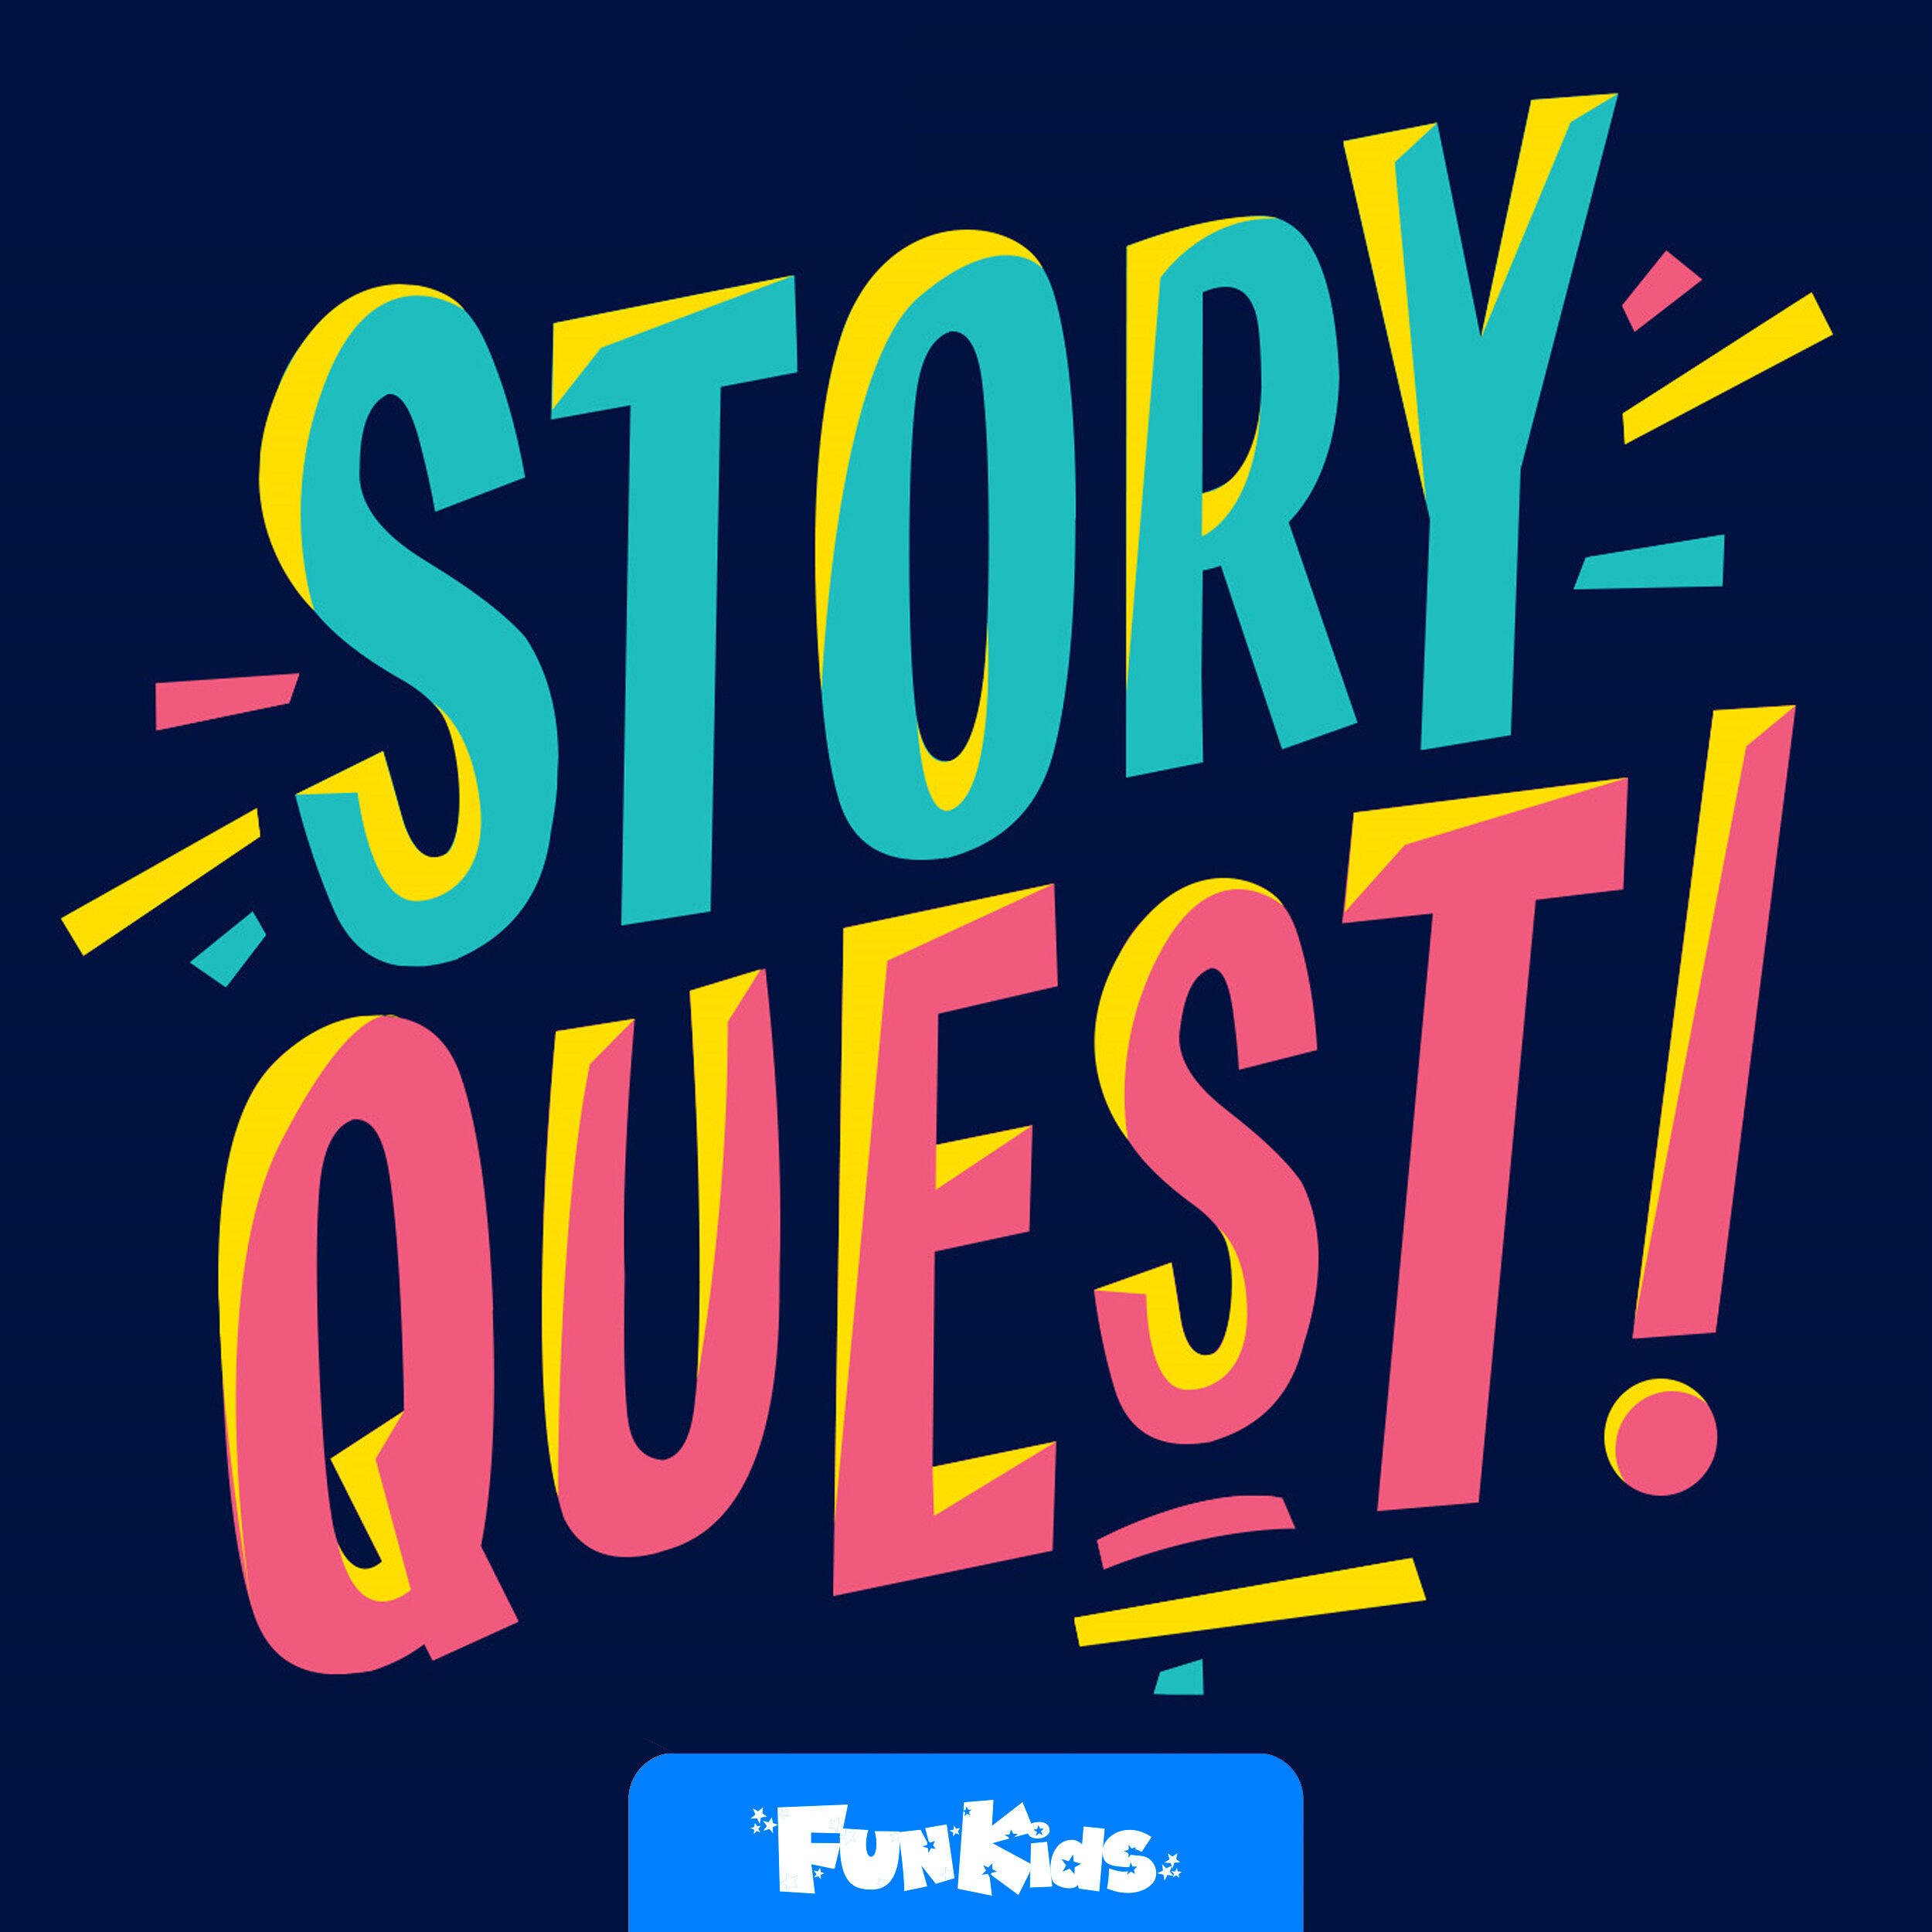 What is Story Quest?